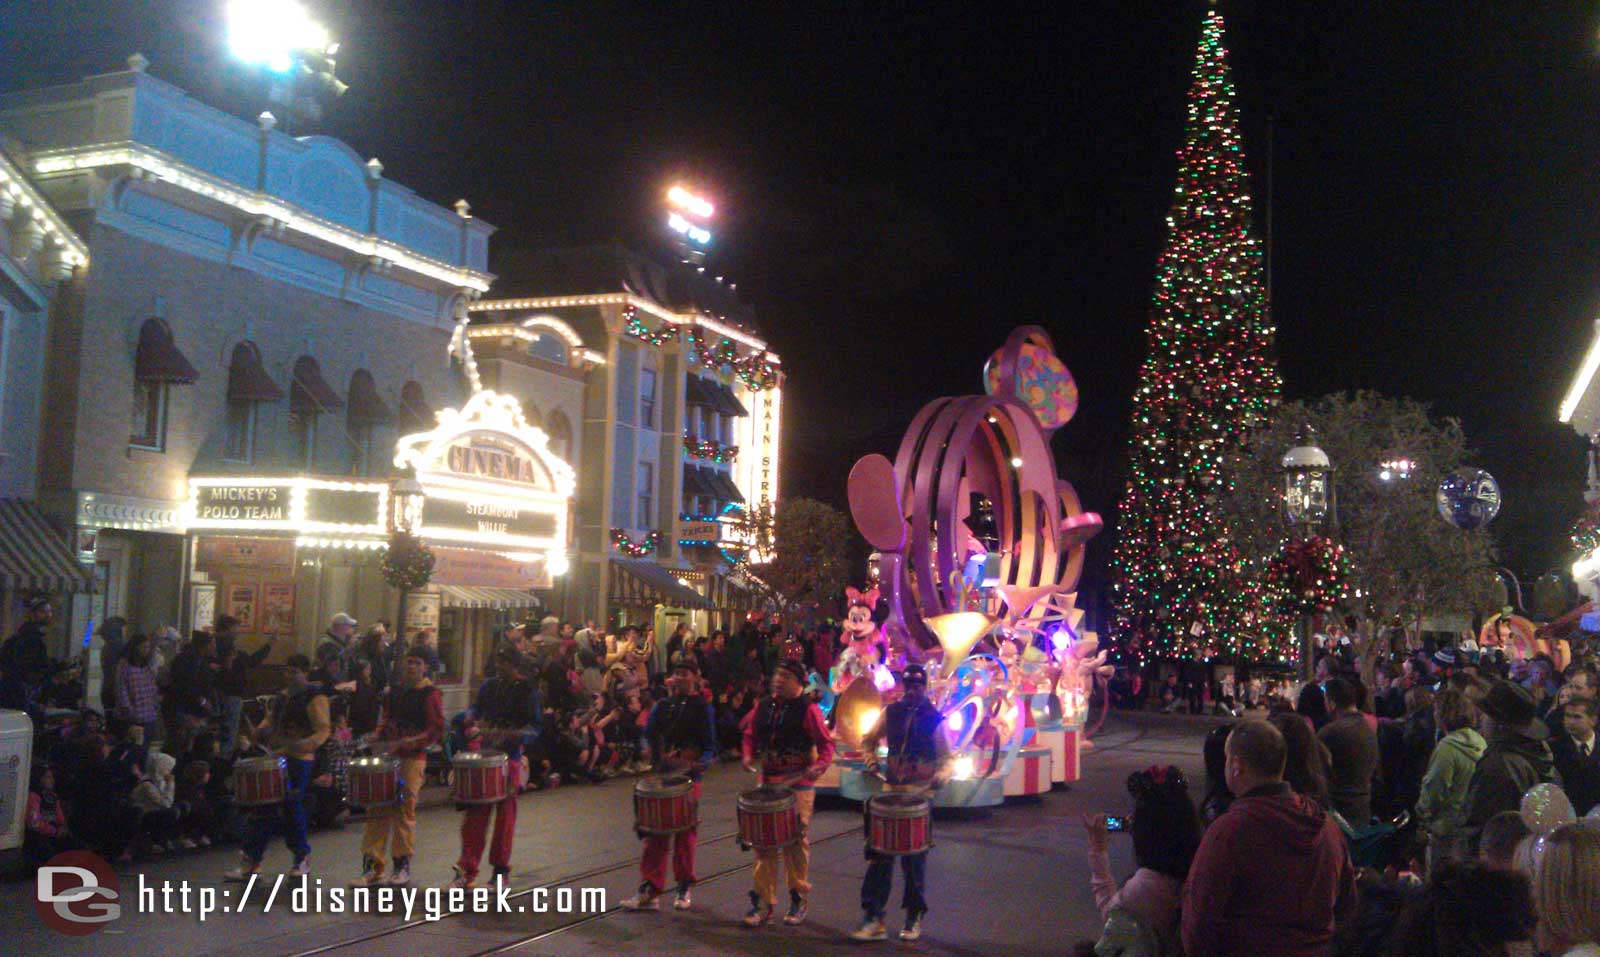 Soundsational making its way down Main Street with the Christmas tree in the background.